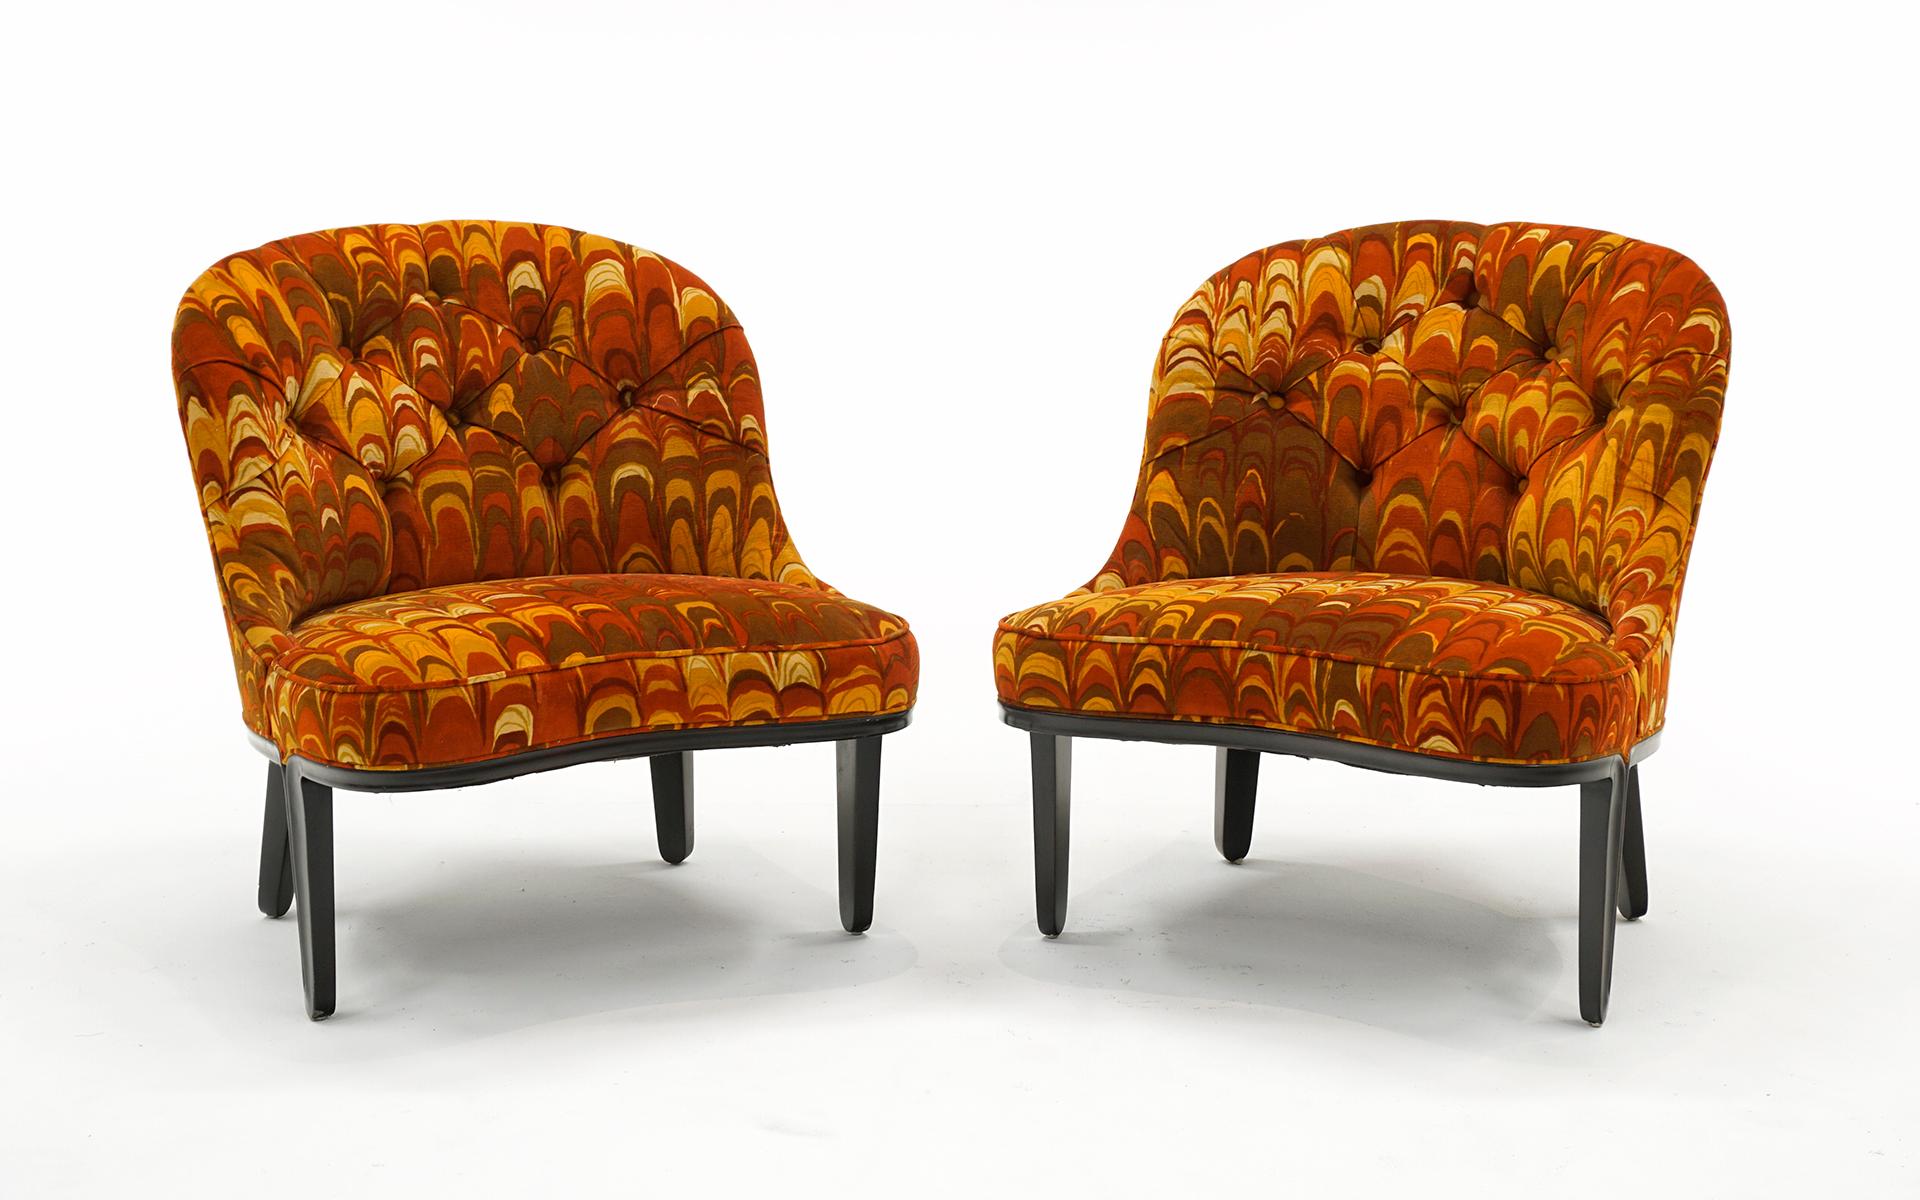 Rare, all original, pair of armless lounge / slipper chairs designed by Edward Wormley for Dunbar.  Both chairs retain the original orange mod swirling fabric in shades of orange designed by Jack Lenor Larsen.  Truly exceptional examples of mid